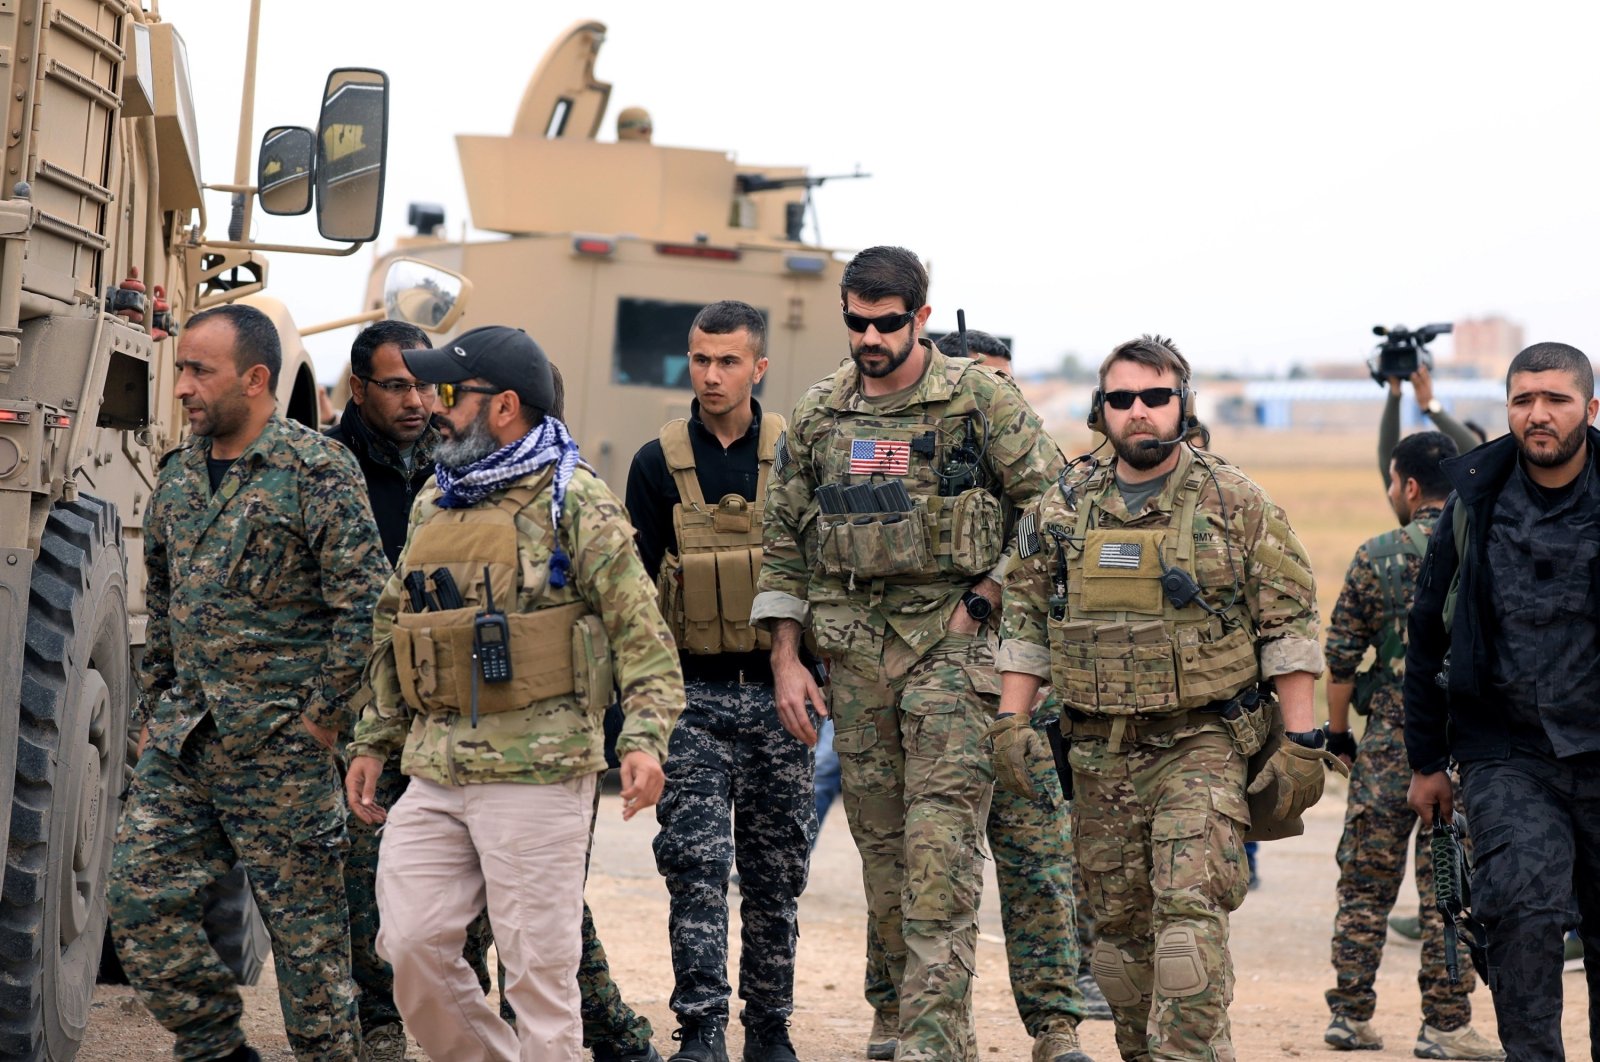 YPG terrorists and U.S. troops are seen together during a joint patrol near the Turkish border in Hassakeh, northeastern Syria, Nov. 4, 2018. (Reuters Photo)